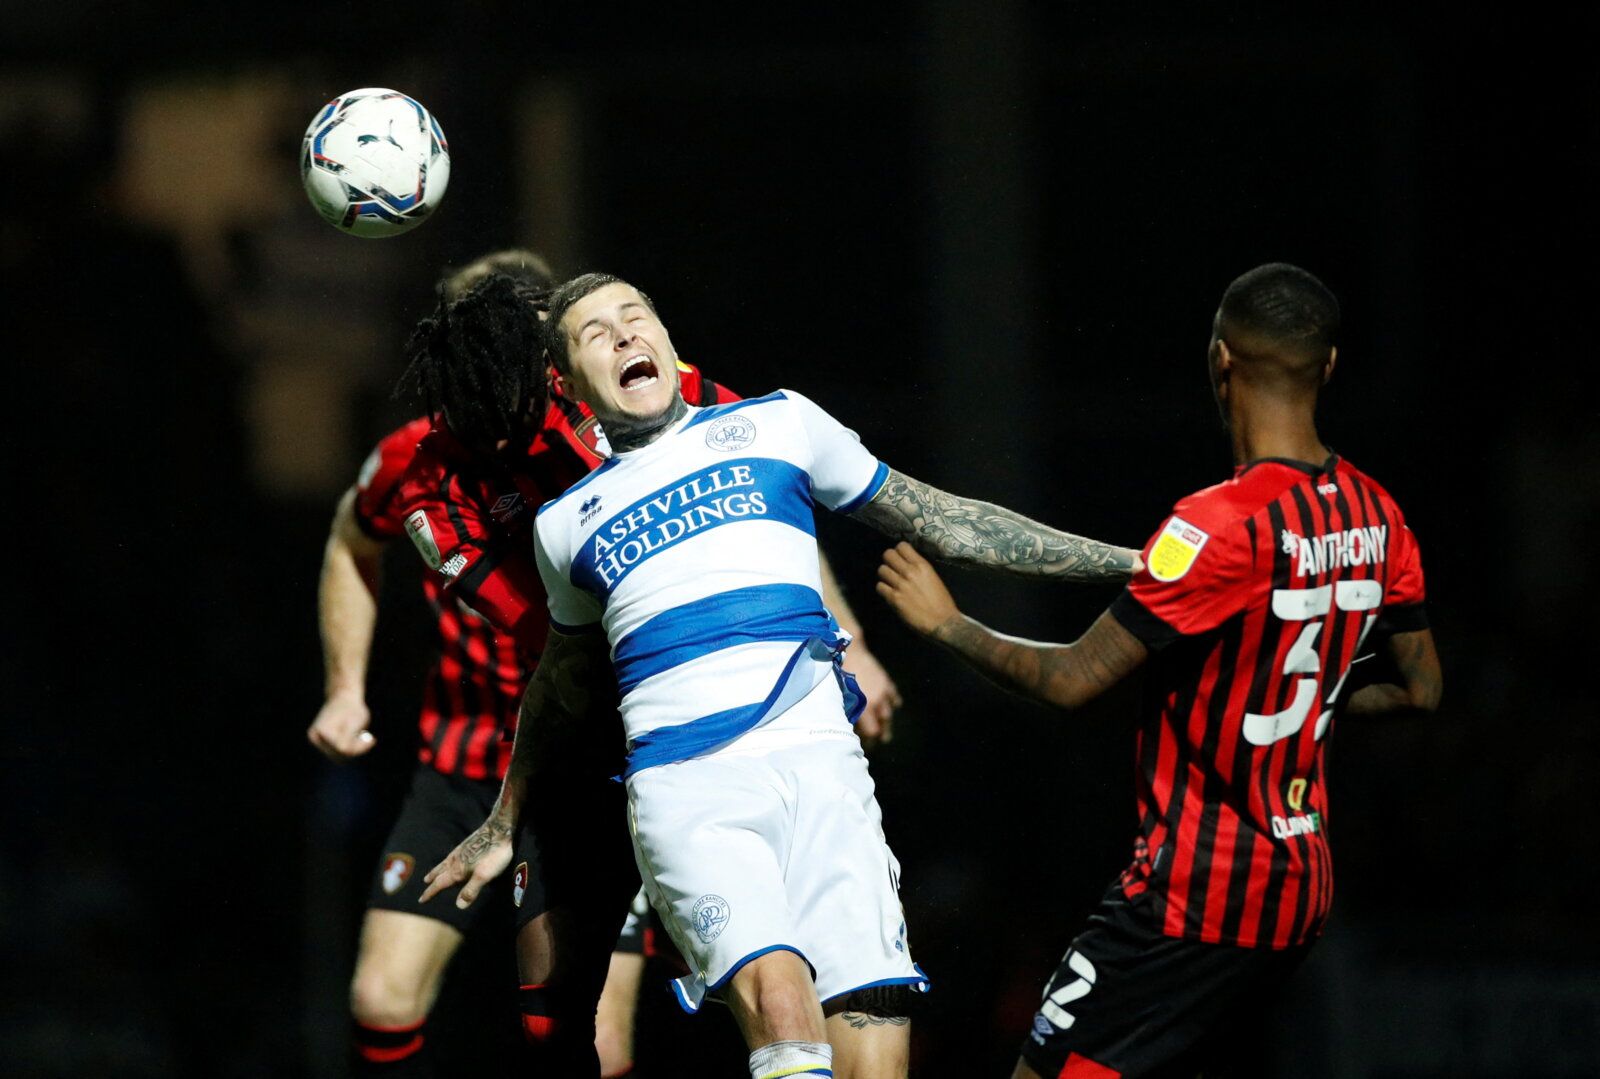 Soccer Football - Championship - Queens Park Rangers v AFC Bournemouth - Loftus Road, London, Britain - December 27, 2021 Queens Park Rangers' Lyndon Dykes in action with AFC Bournemouth's Jordan Zemura  Action Images/Andrew Boyers  EDITORIAL USE ONLY. No use with unauthorized audio, video, data, fixture lists, club/league logos or 